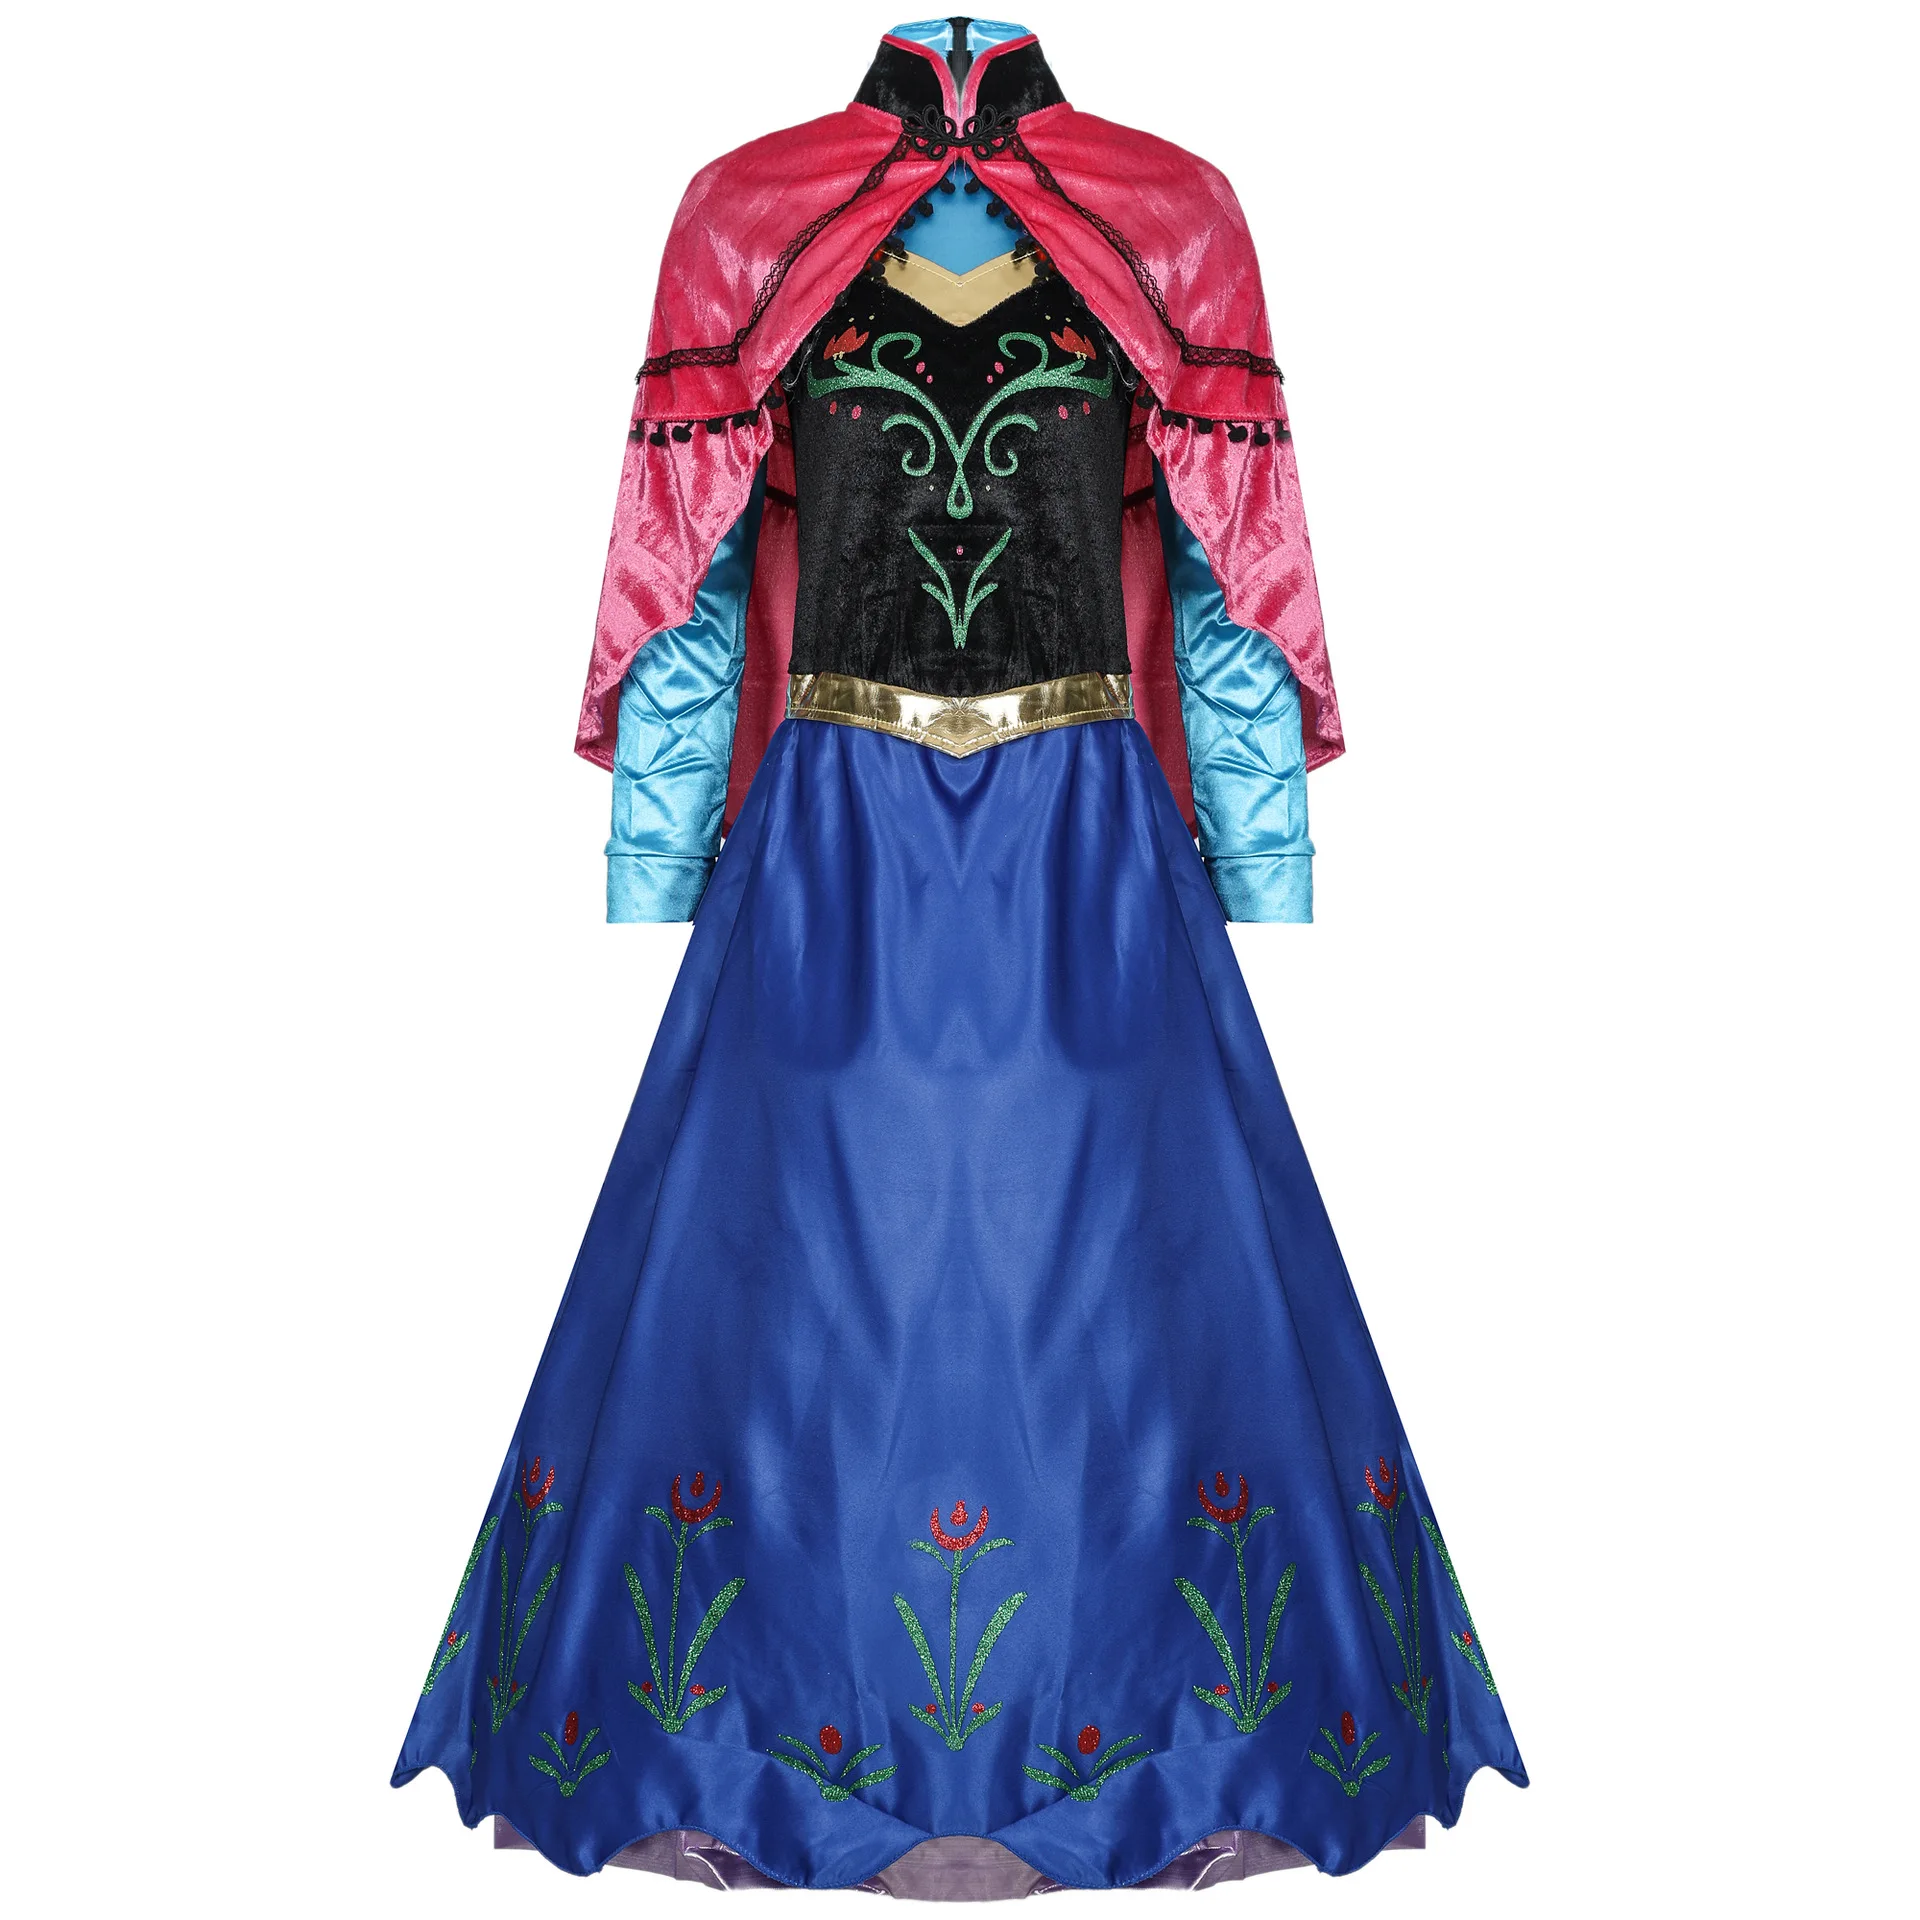 Princess Anna Cosplay Costume Dress Cape Outfit Adult Women Ice Queen Arendelle Anna Princess Elsa Cosplay Fancy Dress